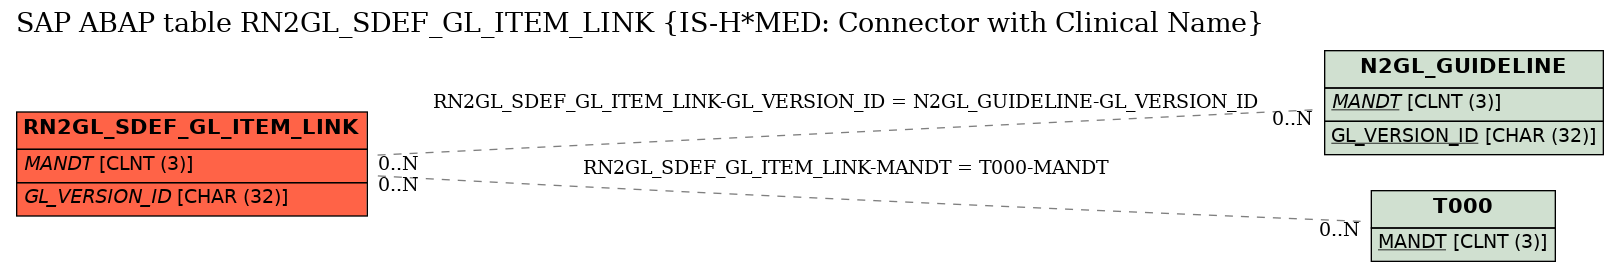 E-R Diagram for table RN2GL_SDEF_GL_ITEM_LINK (IS-H*MED: Connector with Clinical Name)